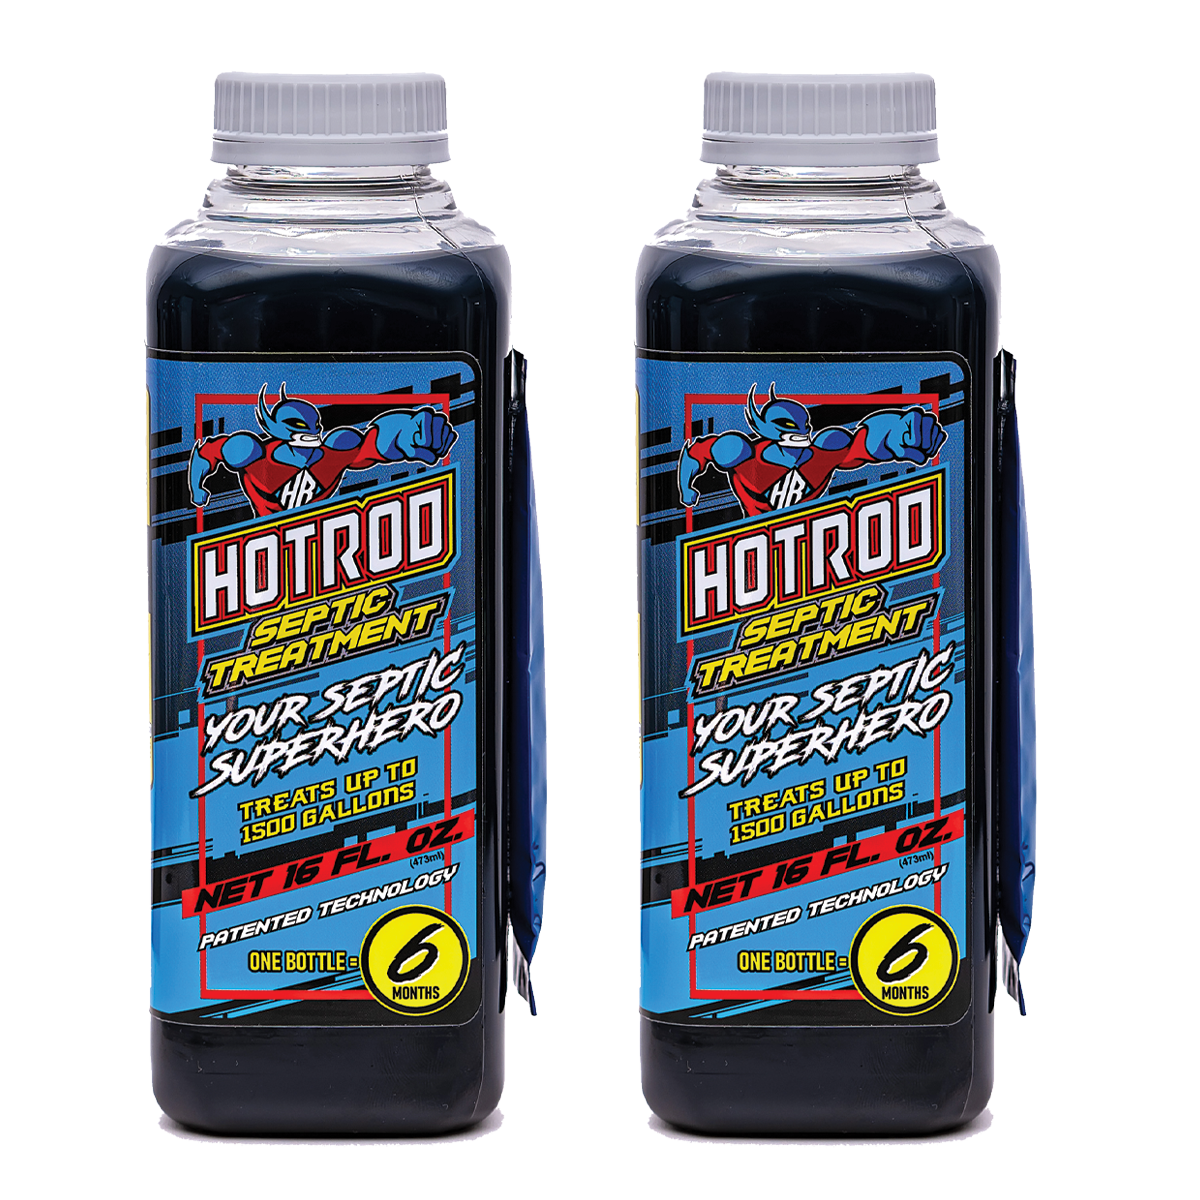 HOTROD Septic Treatment – Save With A Subscription!